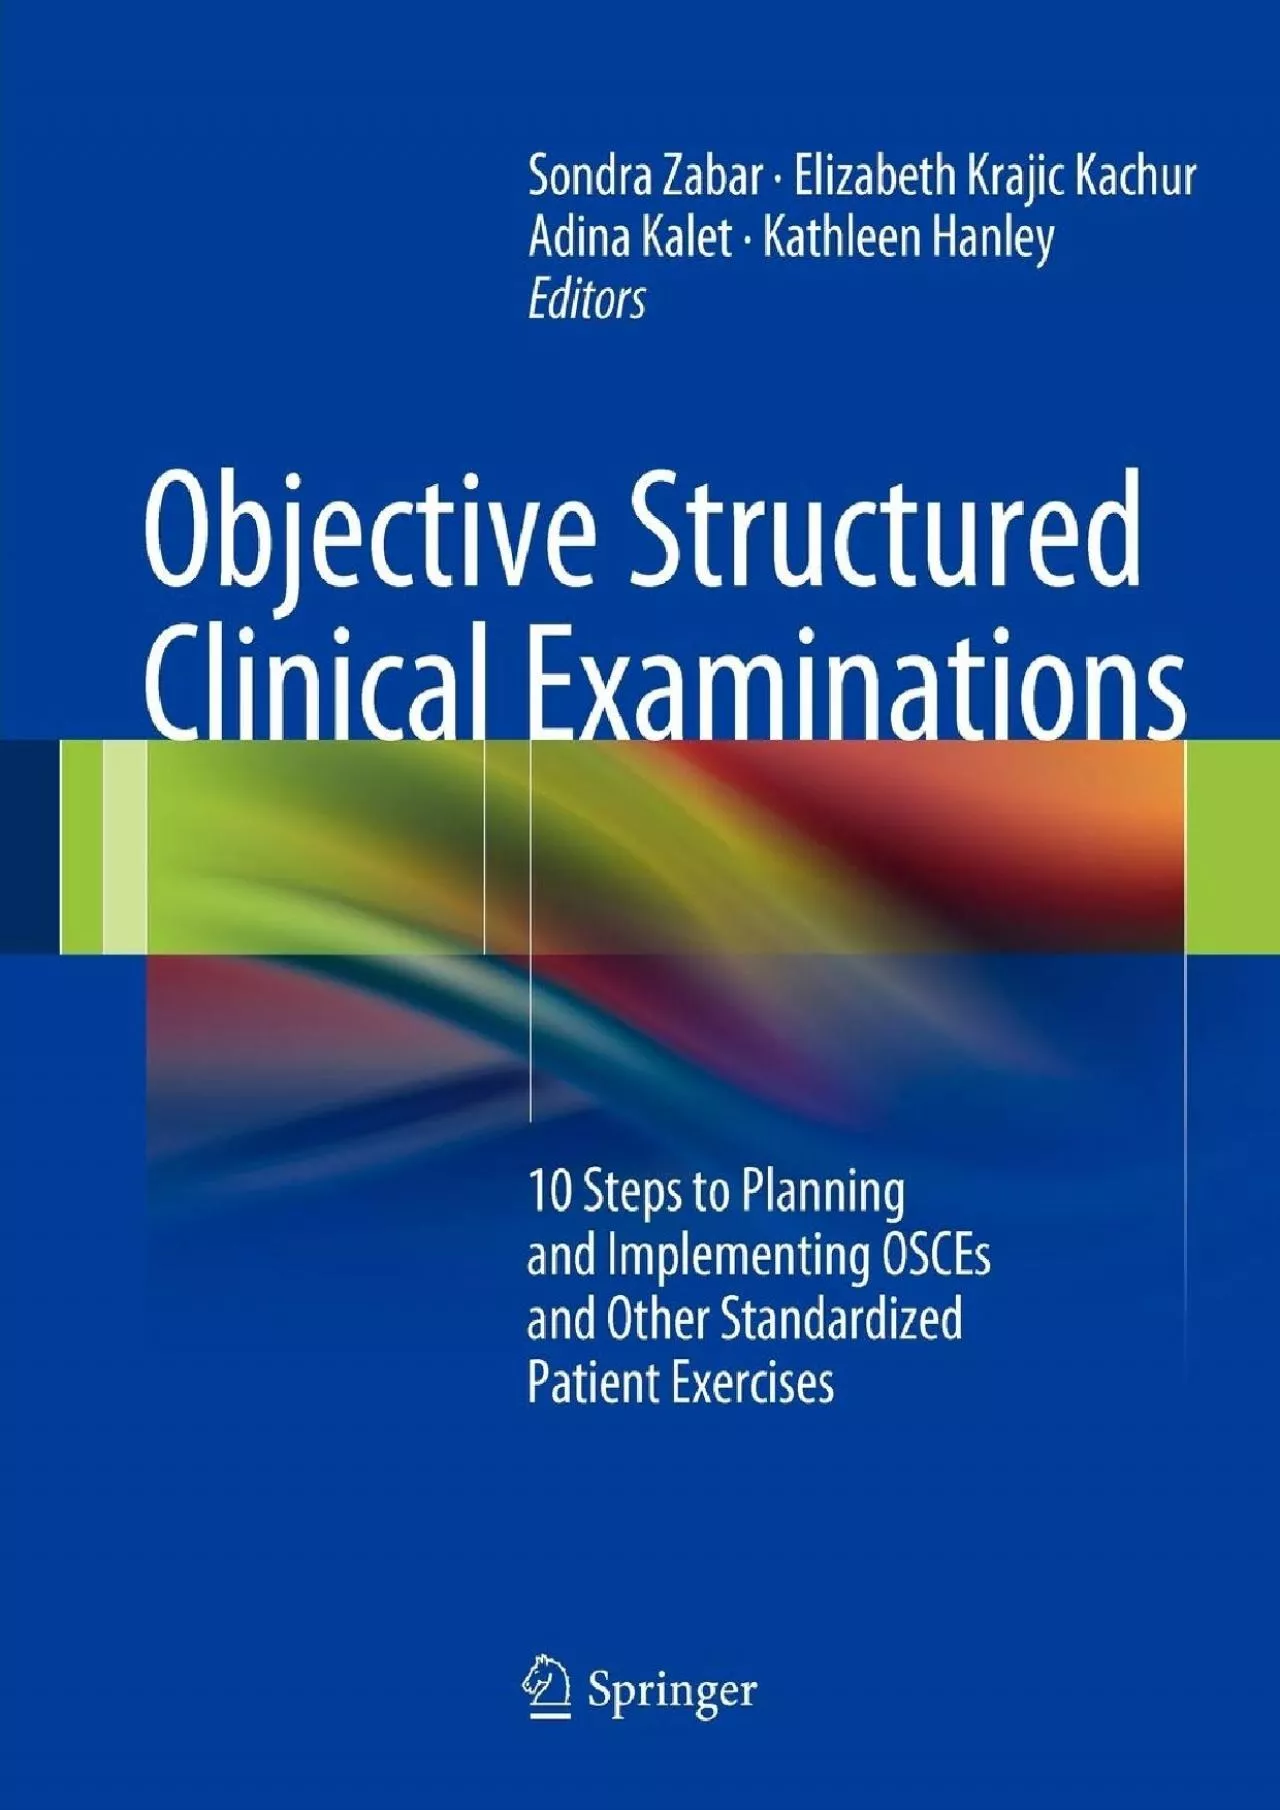 (READ)-Objective Structured Clinical Examinations: 10 Steps to Planning and Implementing